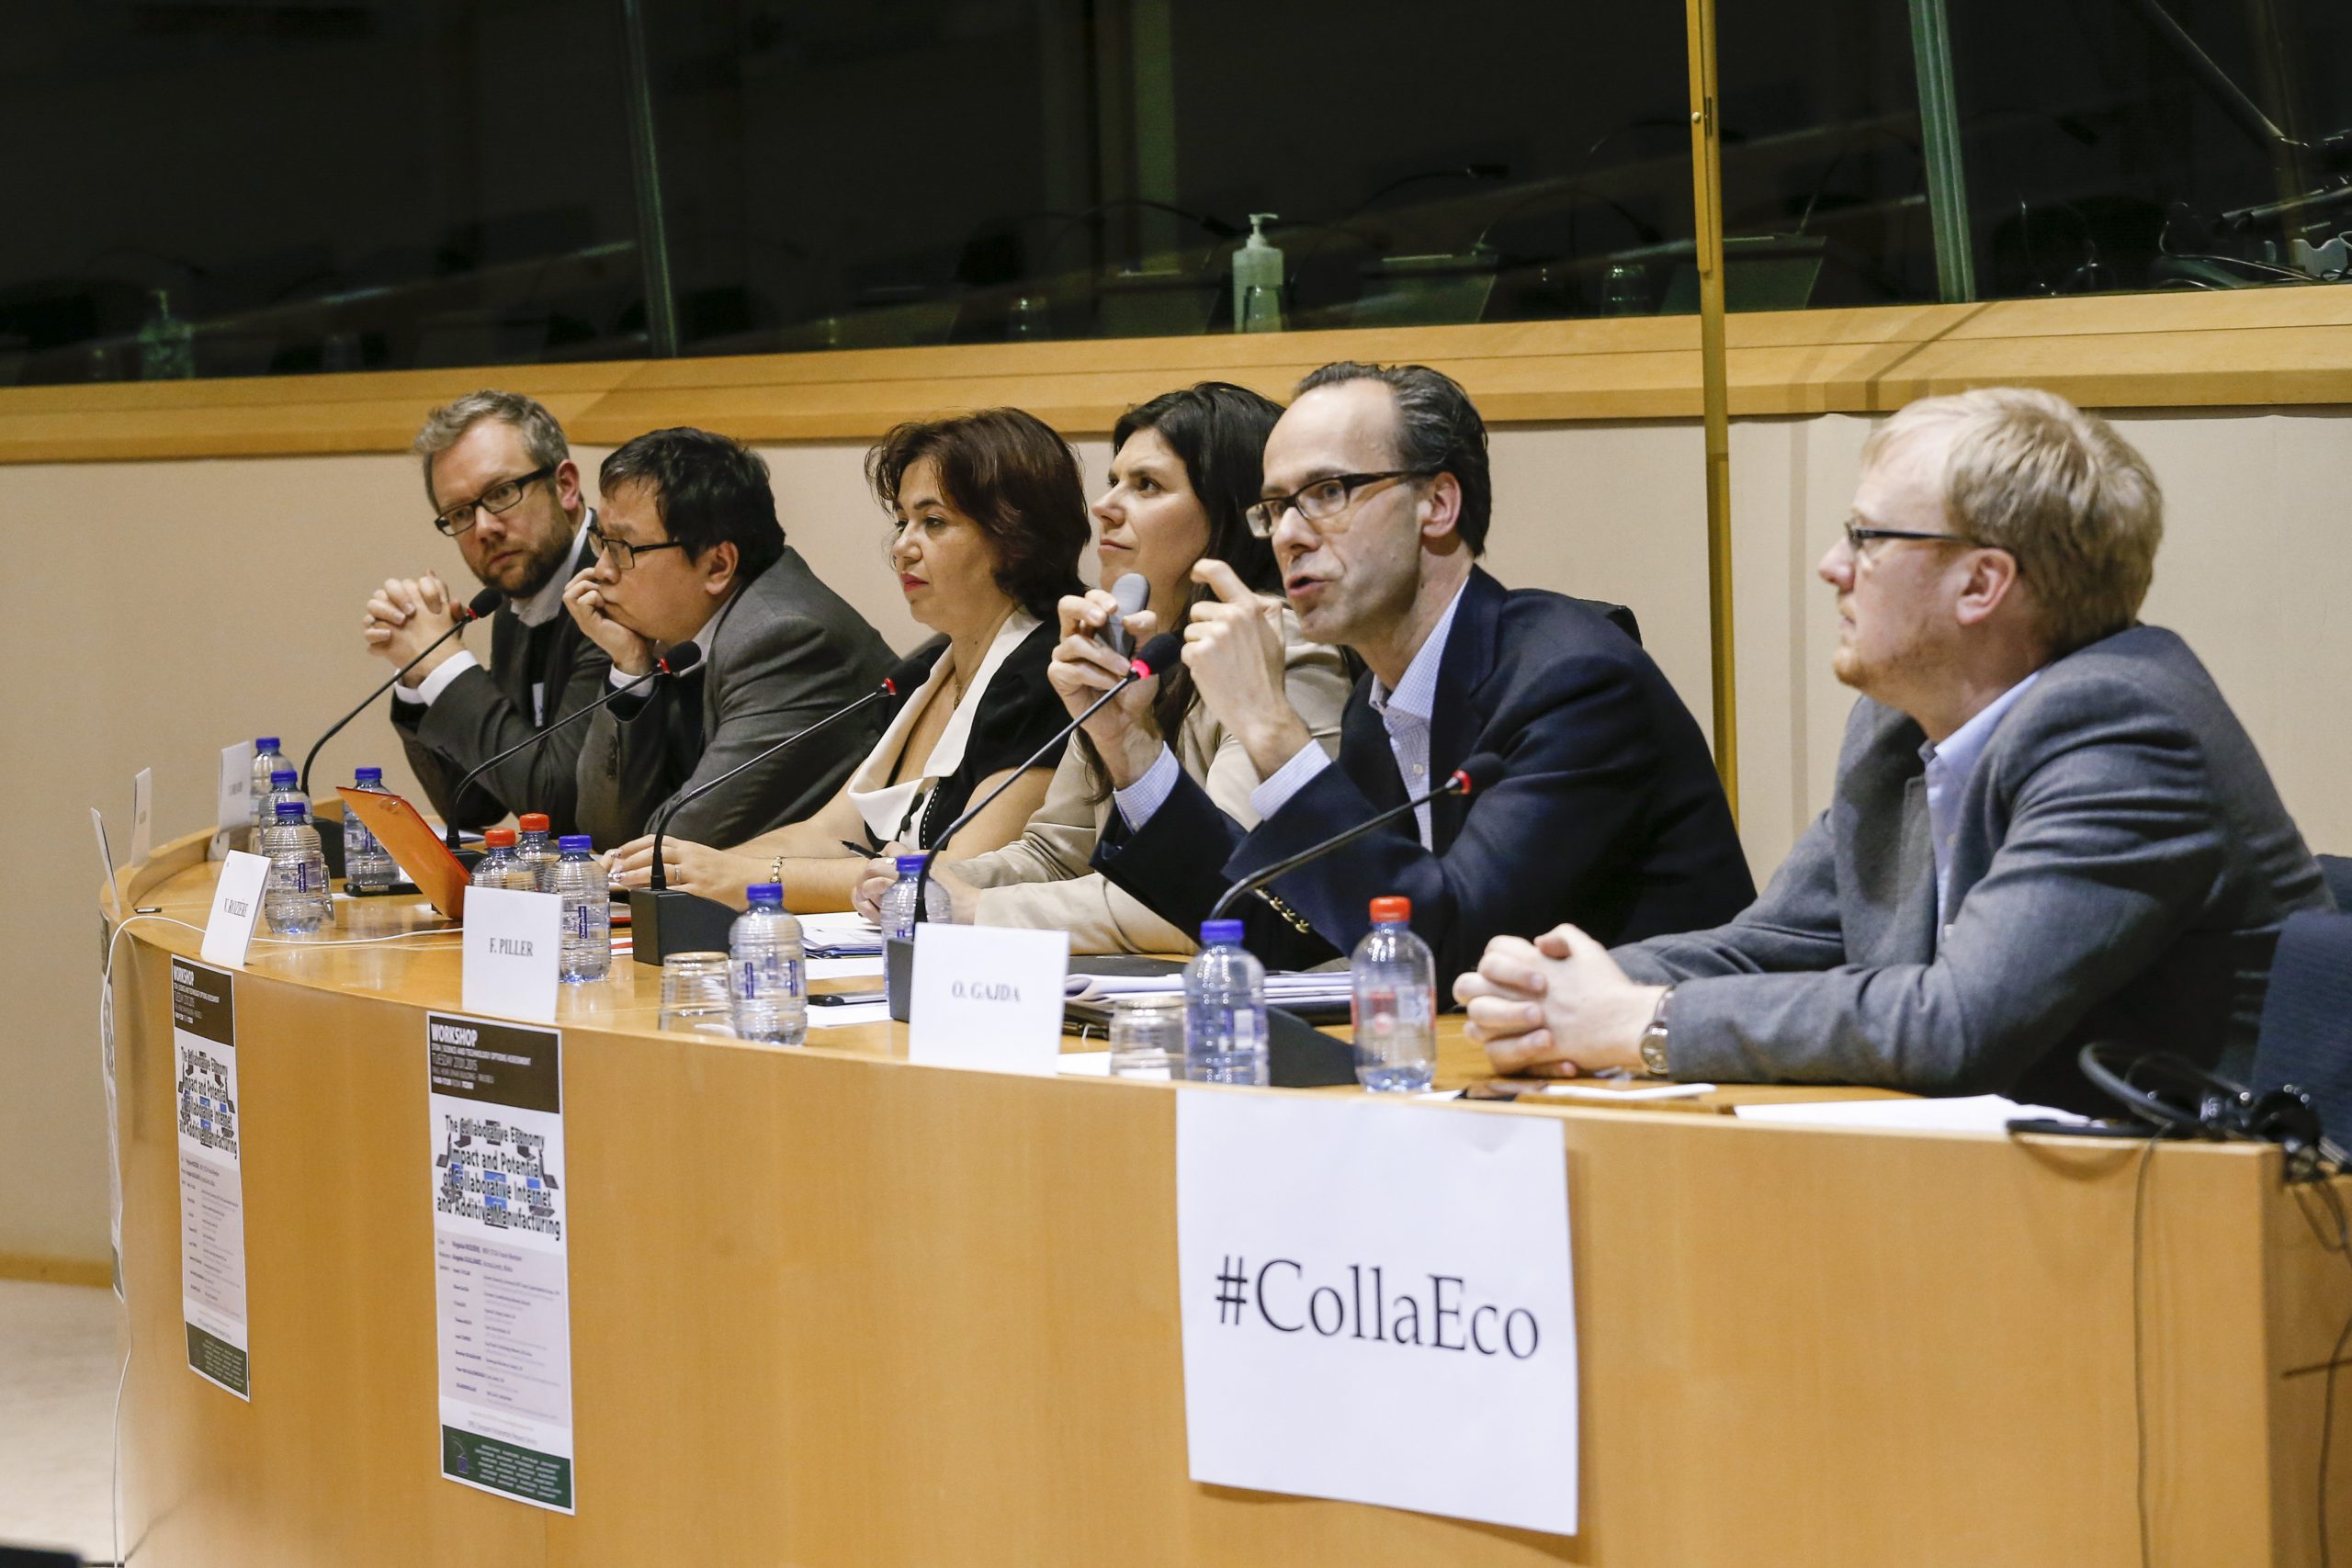 Collaborative economy: will our lives change?